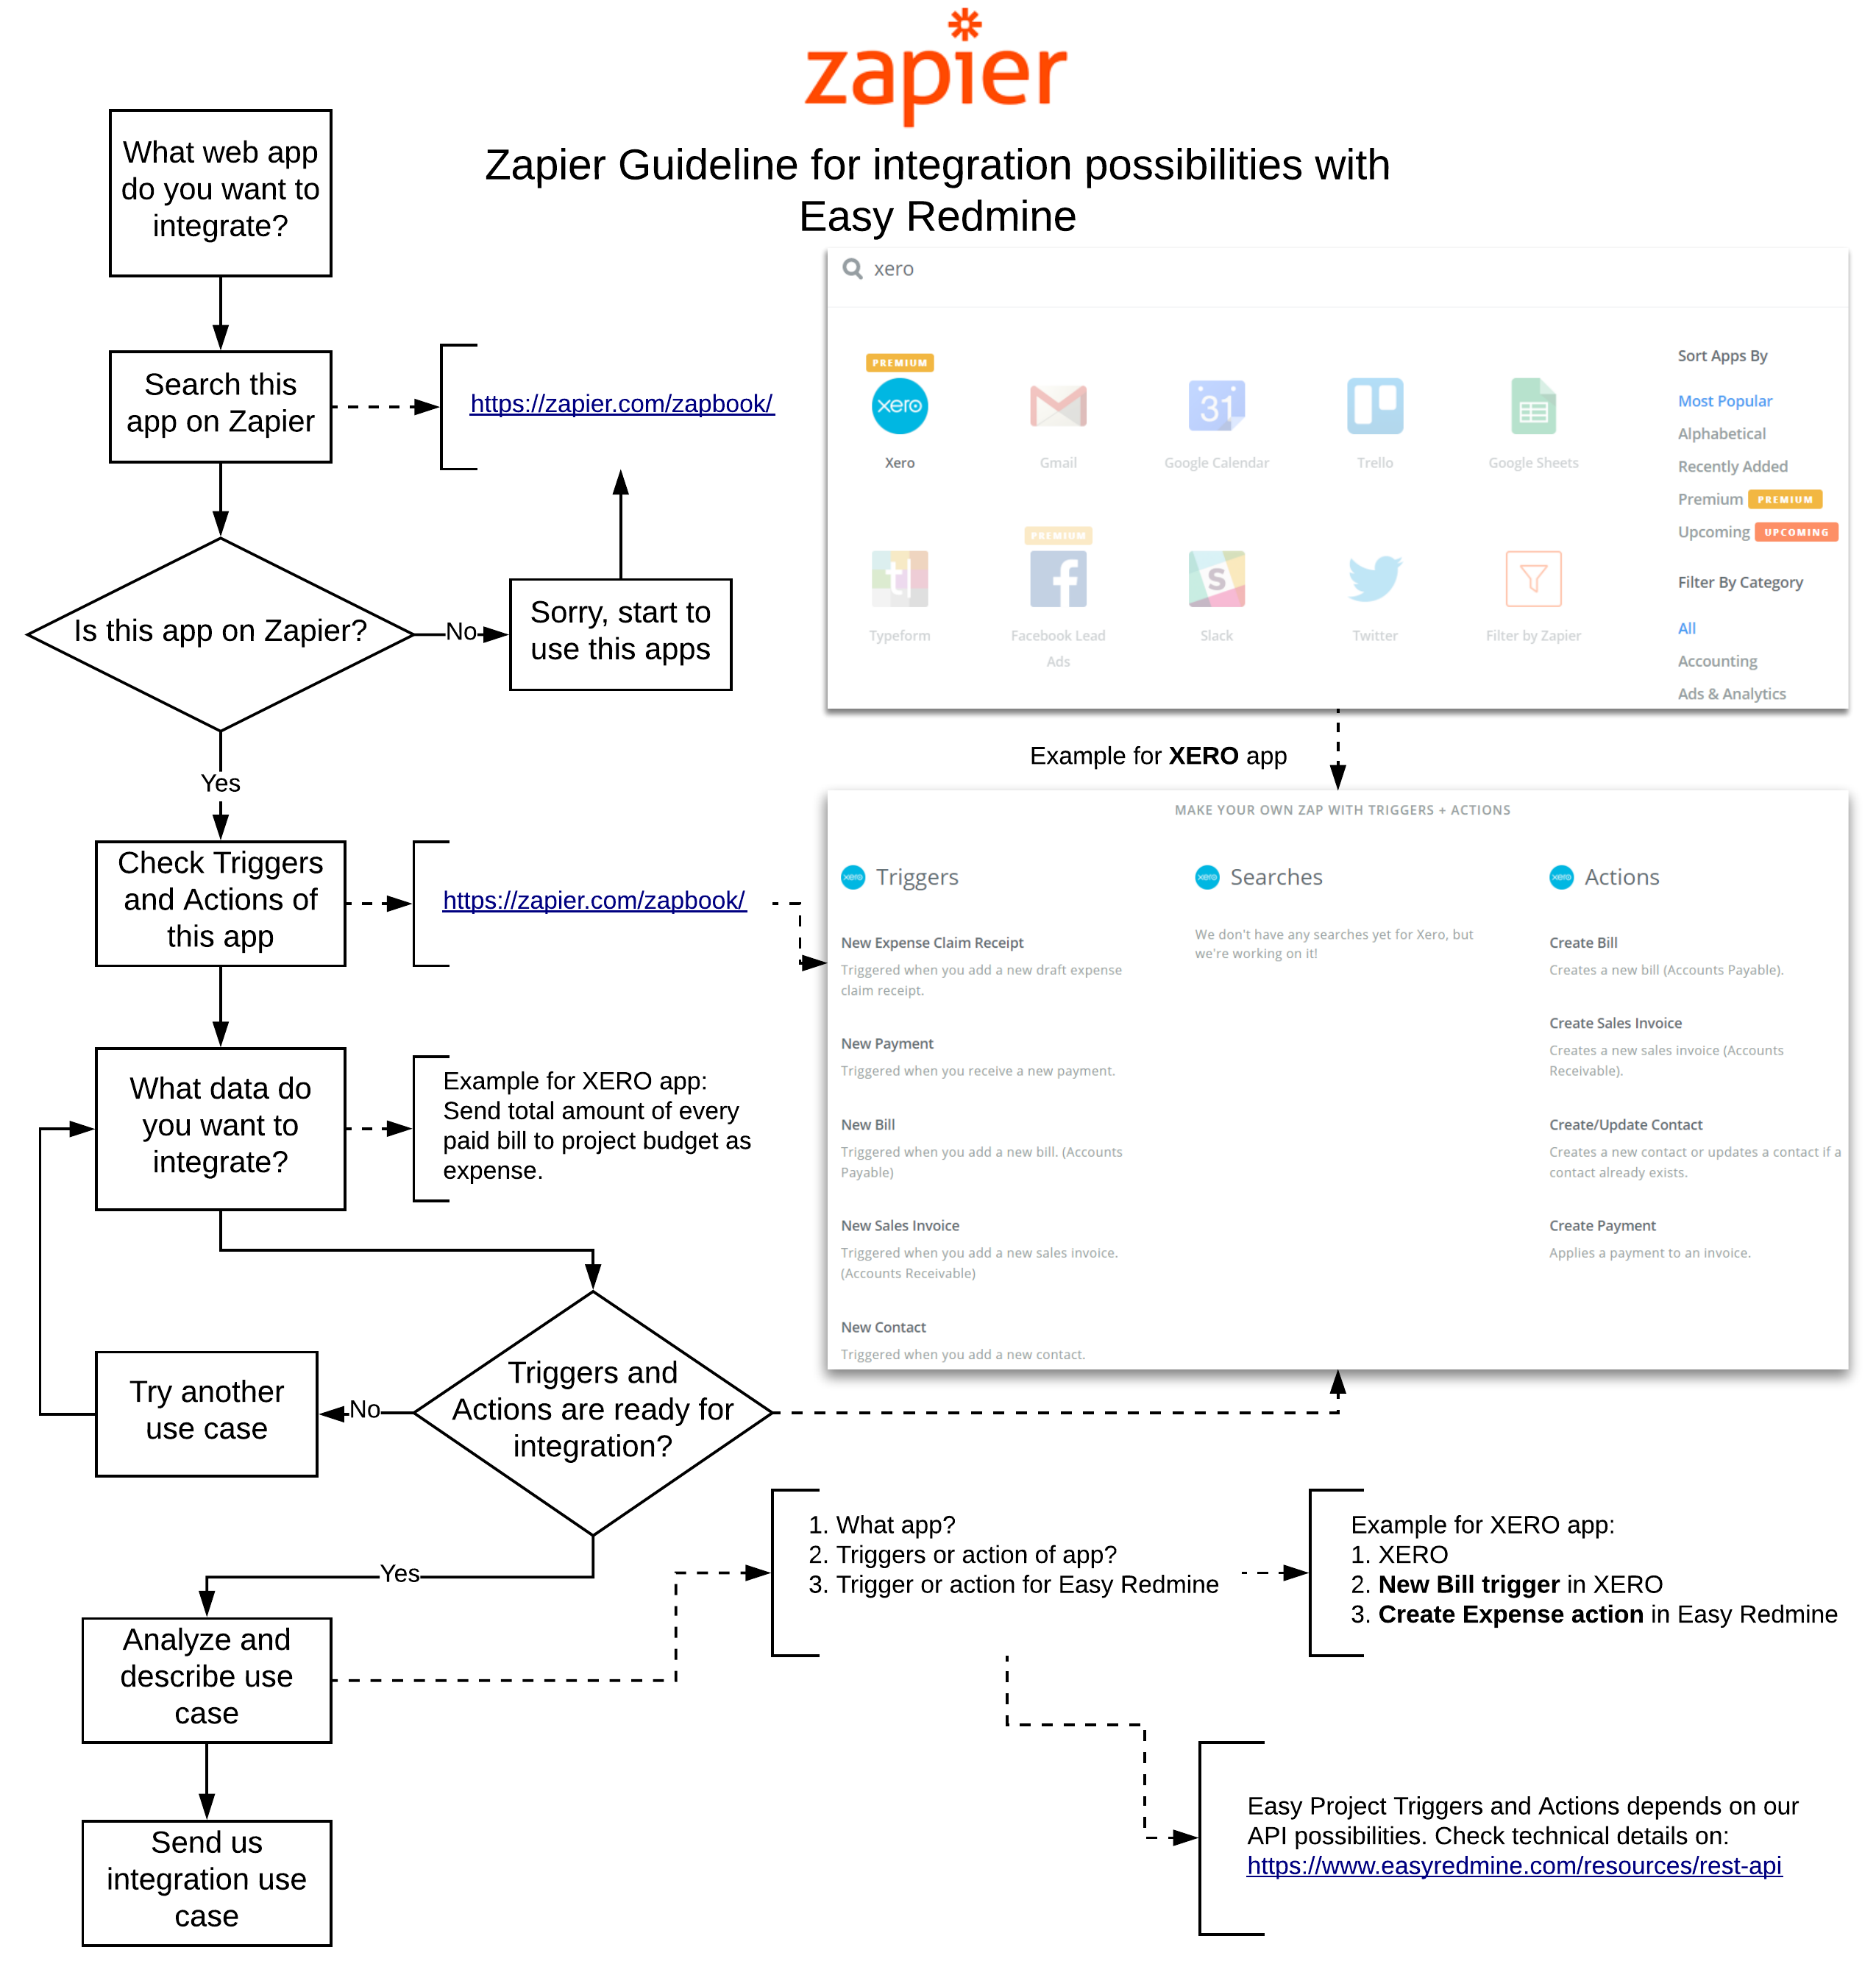 Zapier guideline for integration with Easy Redmine 2018